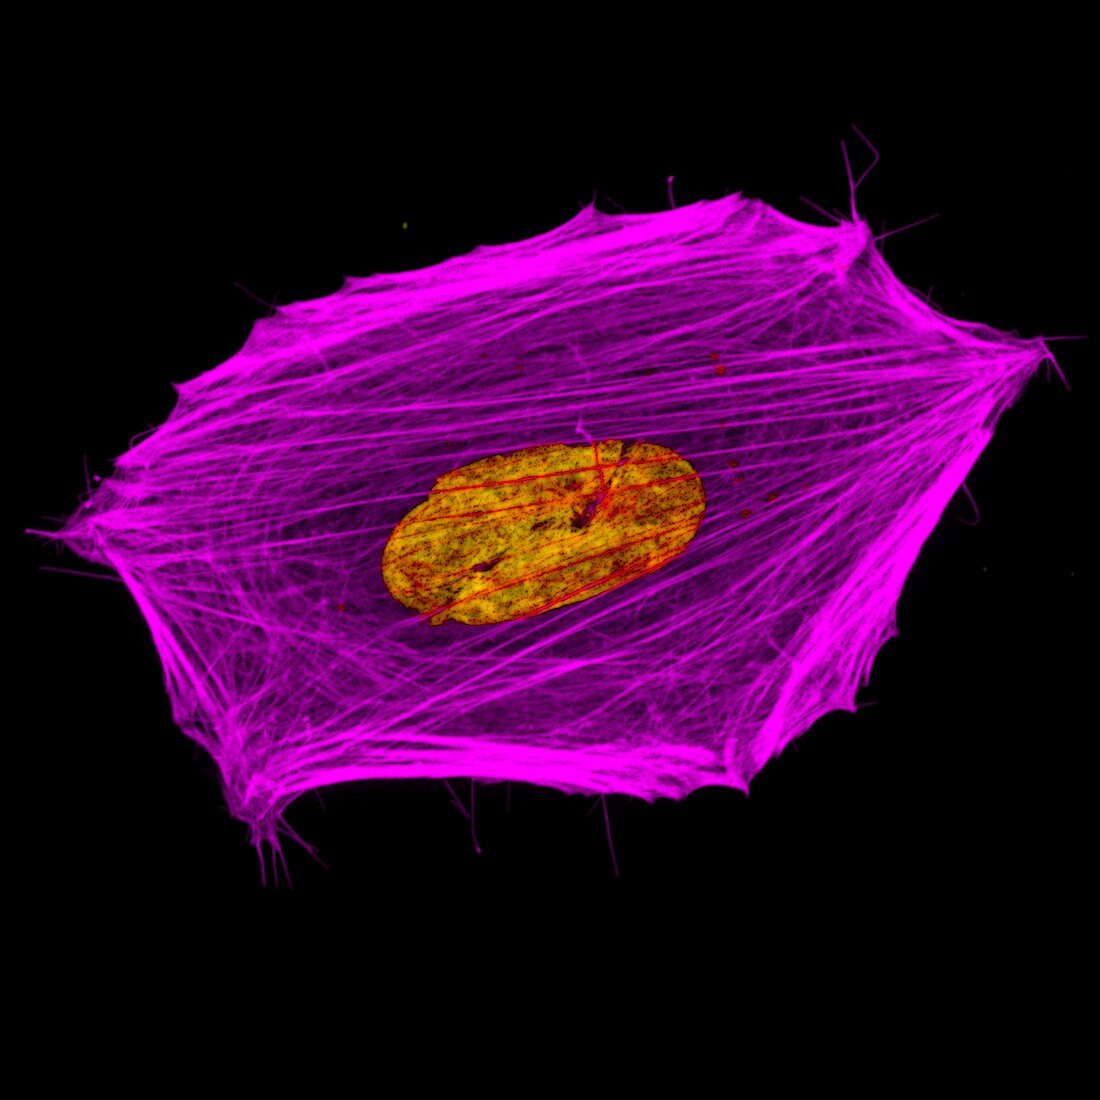 Cancer cell cytoskeleton and nuclei, light micrograph